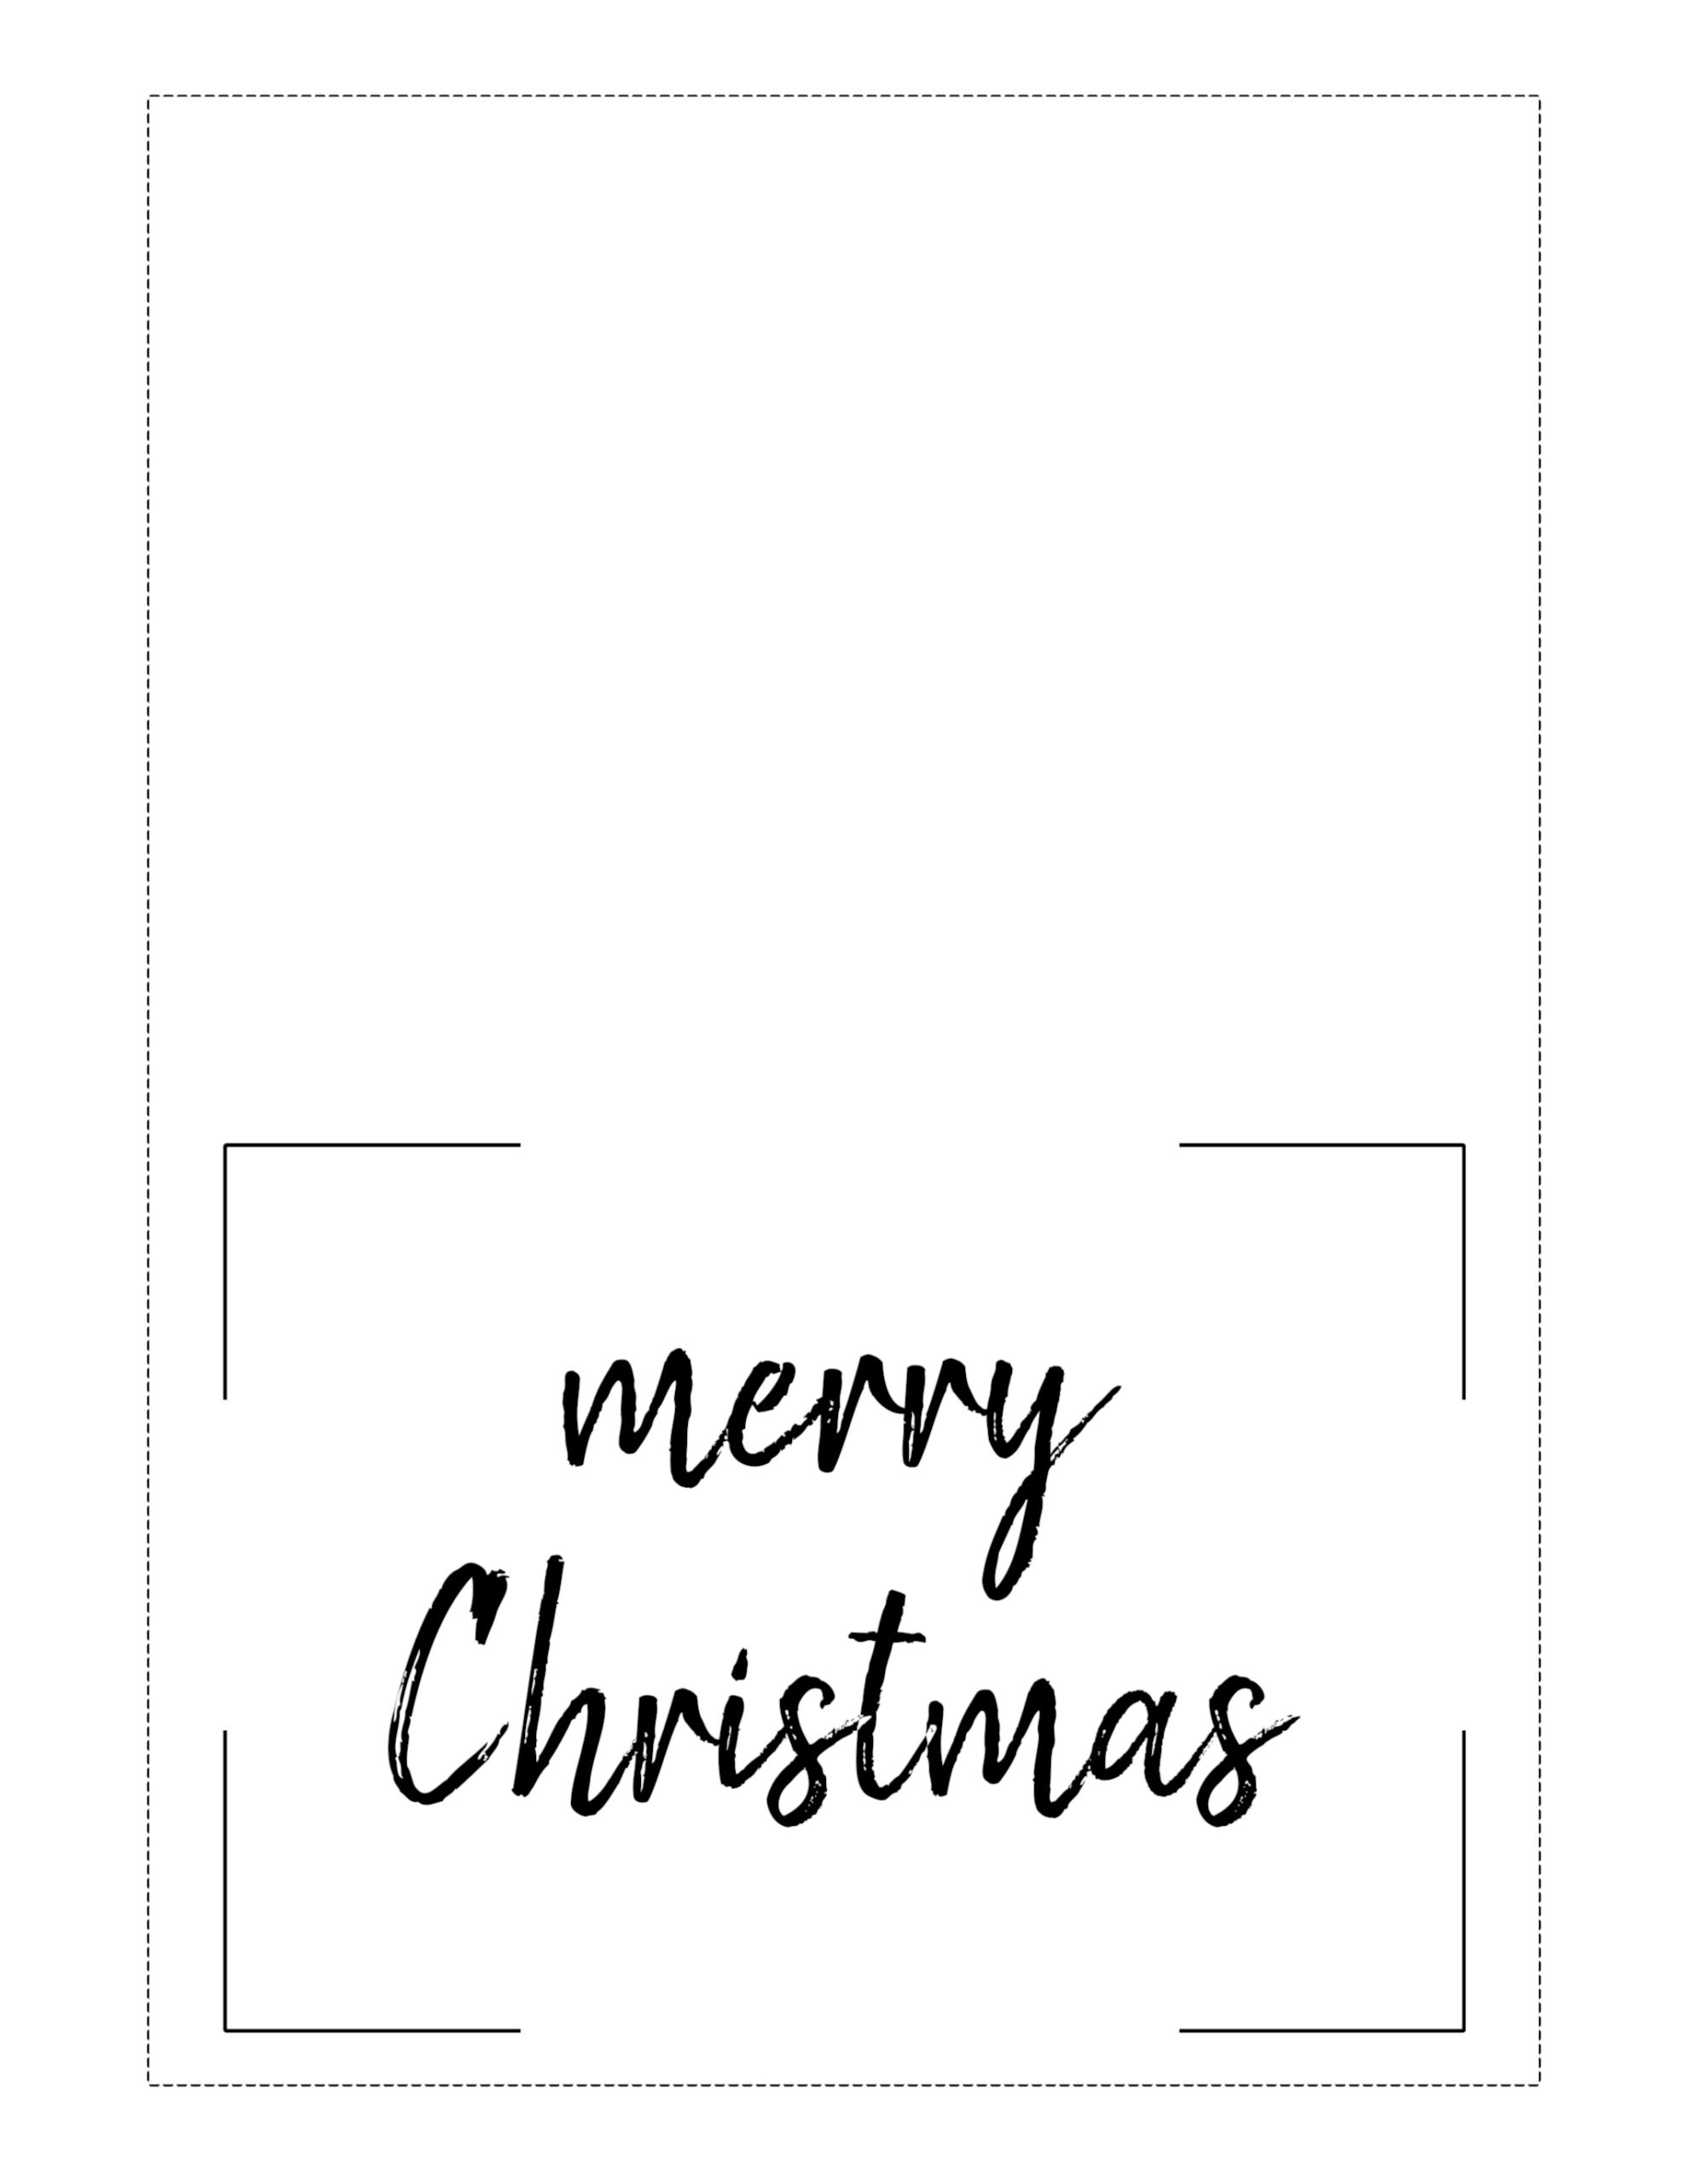 owl-christmas-printable-stationery-bookmarks-candy-wrappers-labels